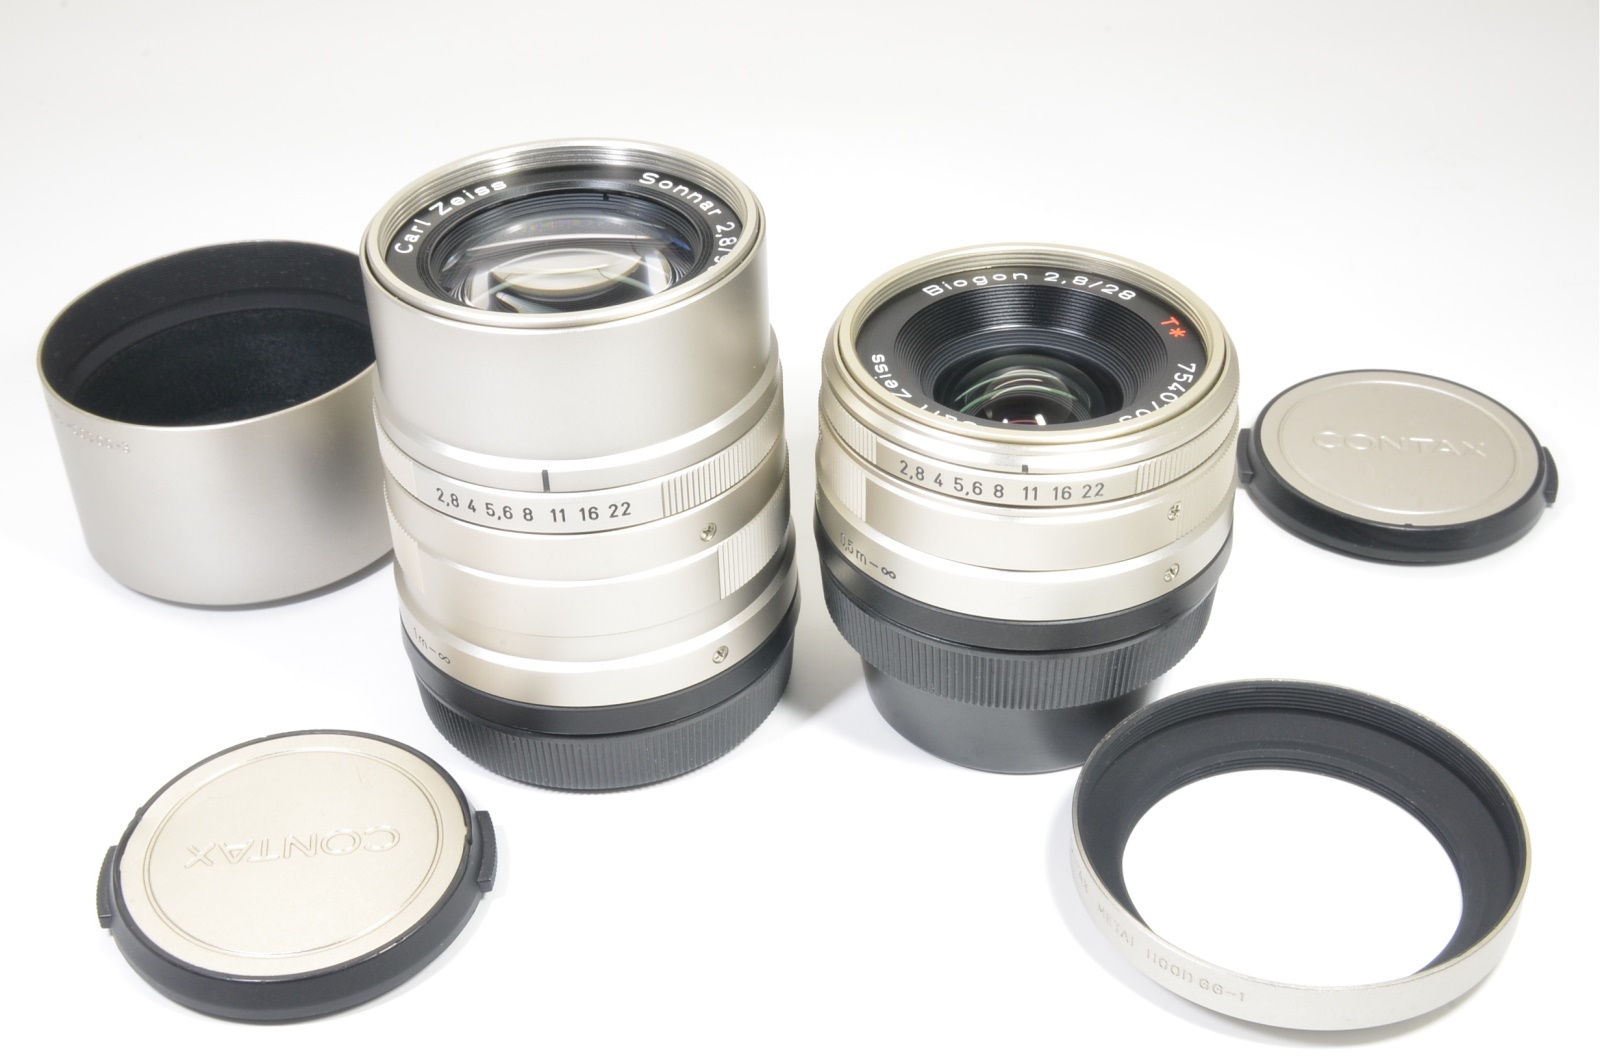 contax carl zeiss t* biogon 28mm f2.8 and sonnar 90mm f2.8 for g1, g2 from japan